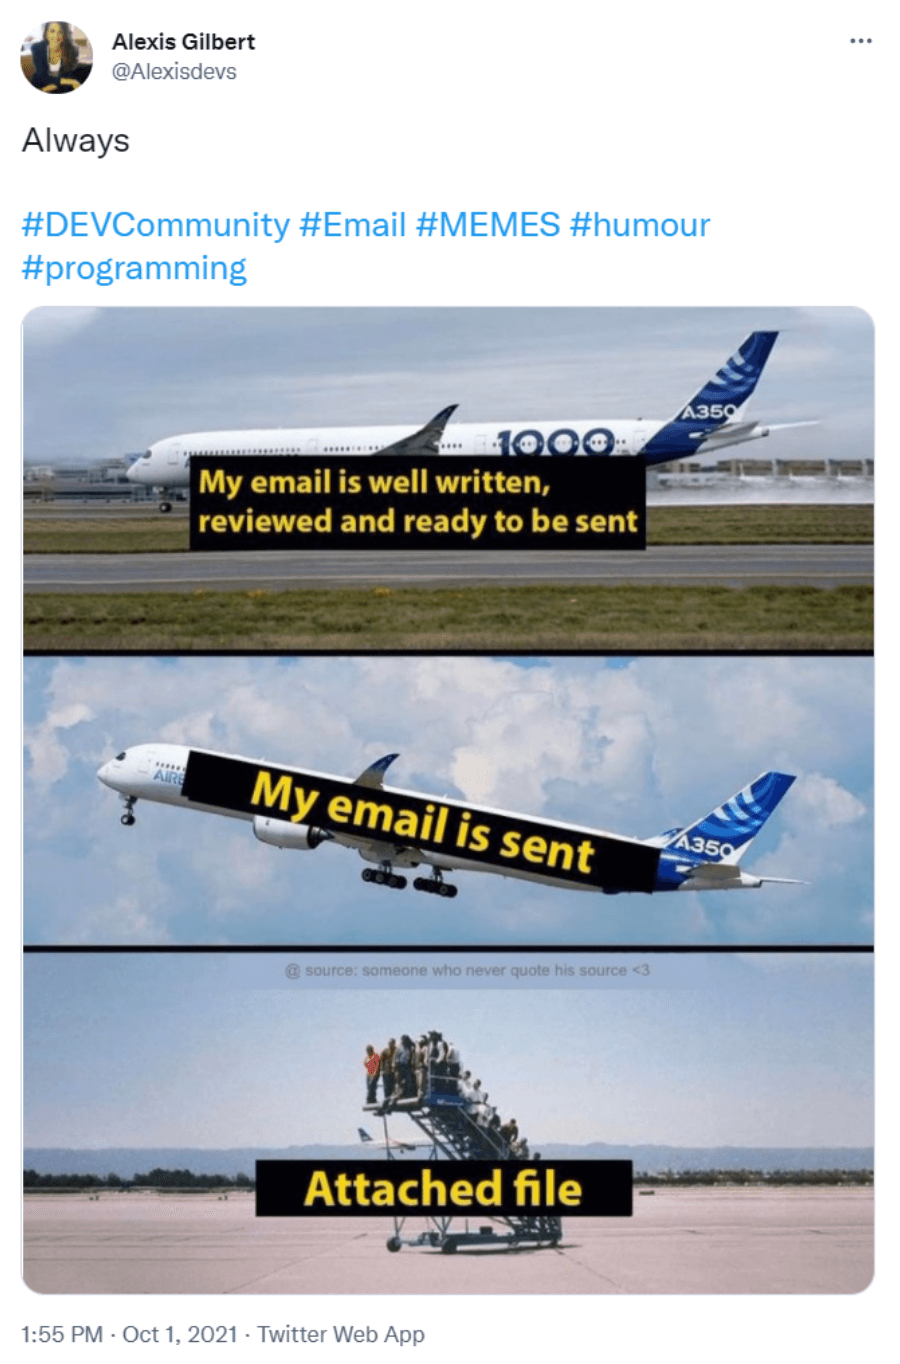 A tweet with an airplane taking off and the text “My email is well written, reviewed, and ready to be sent”, then the plane is in the air with the text “My email is sent”. In the last picture, there is a plane ramp full of people and the text “Attached file”.